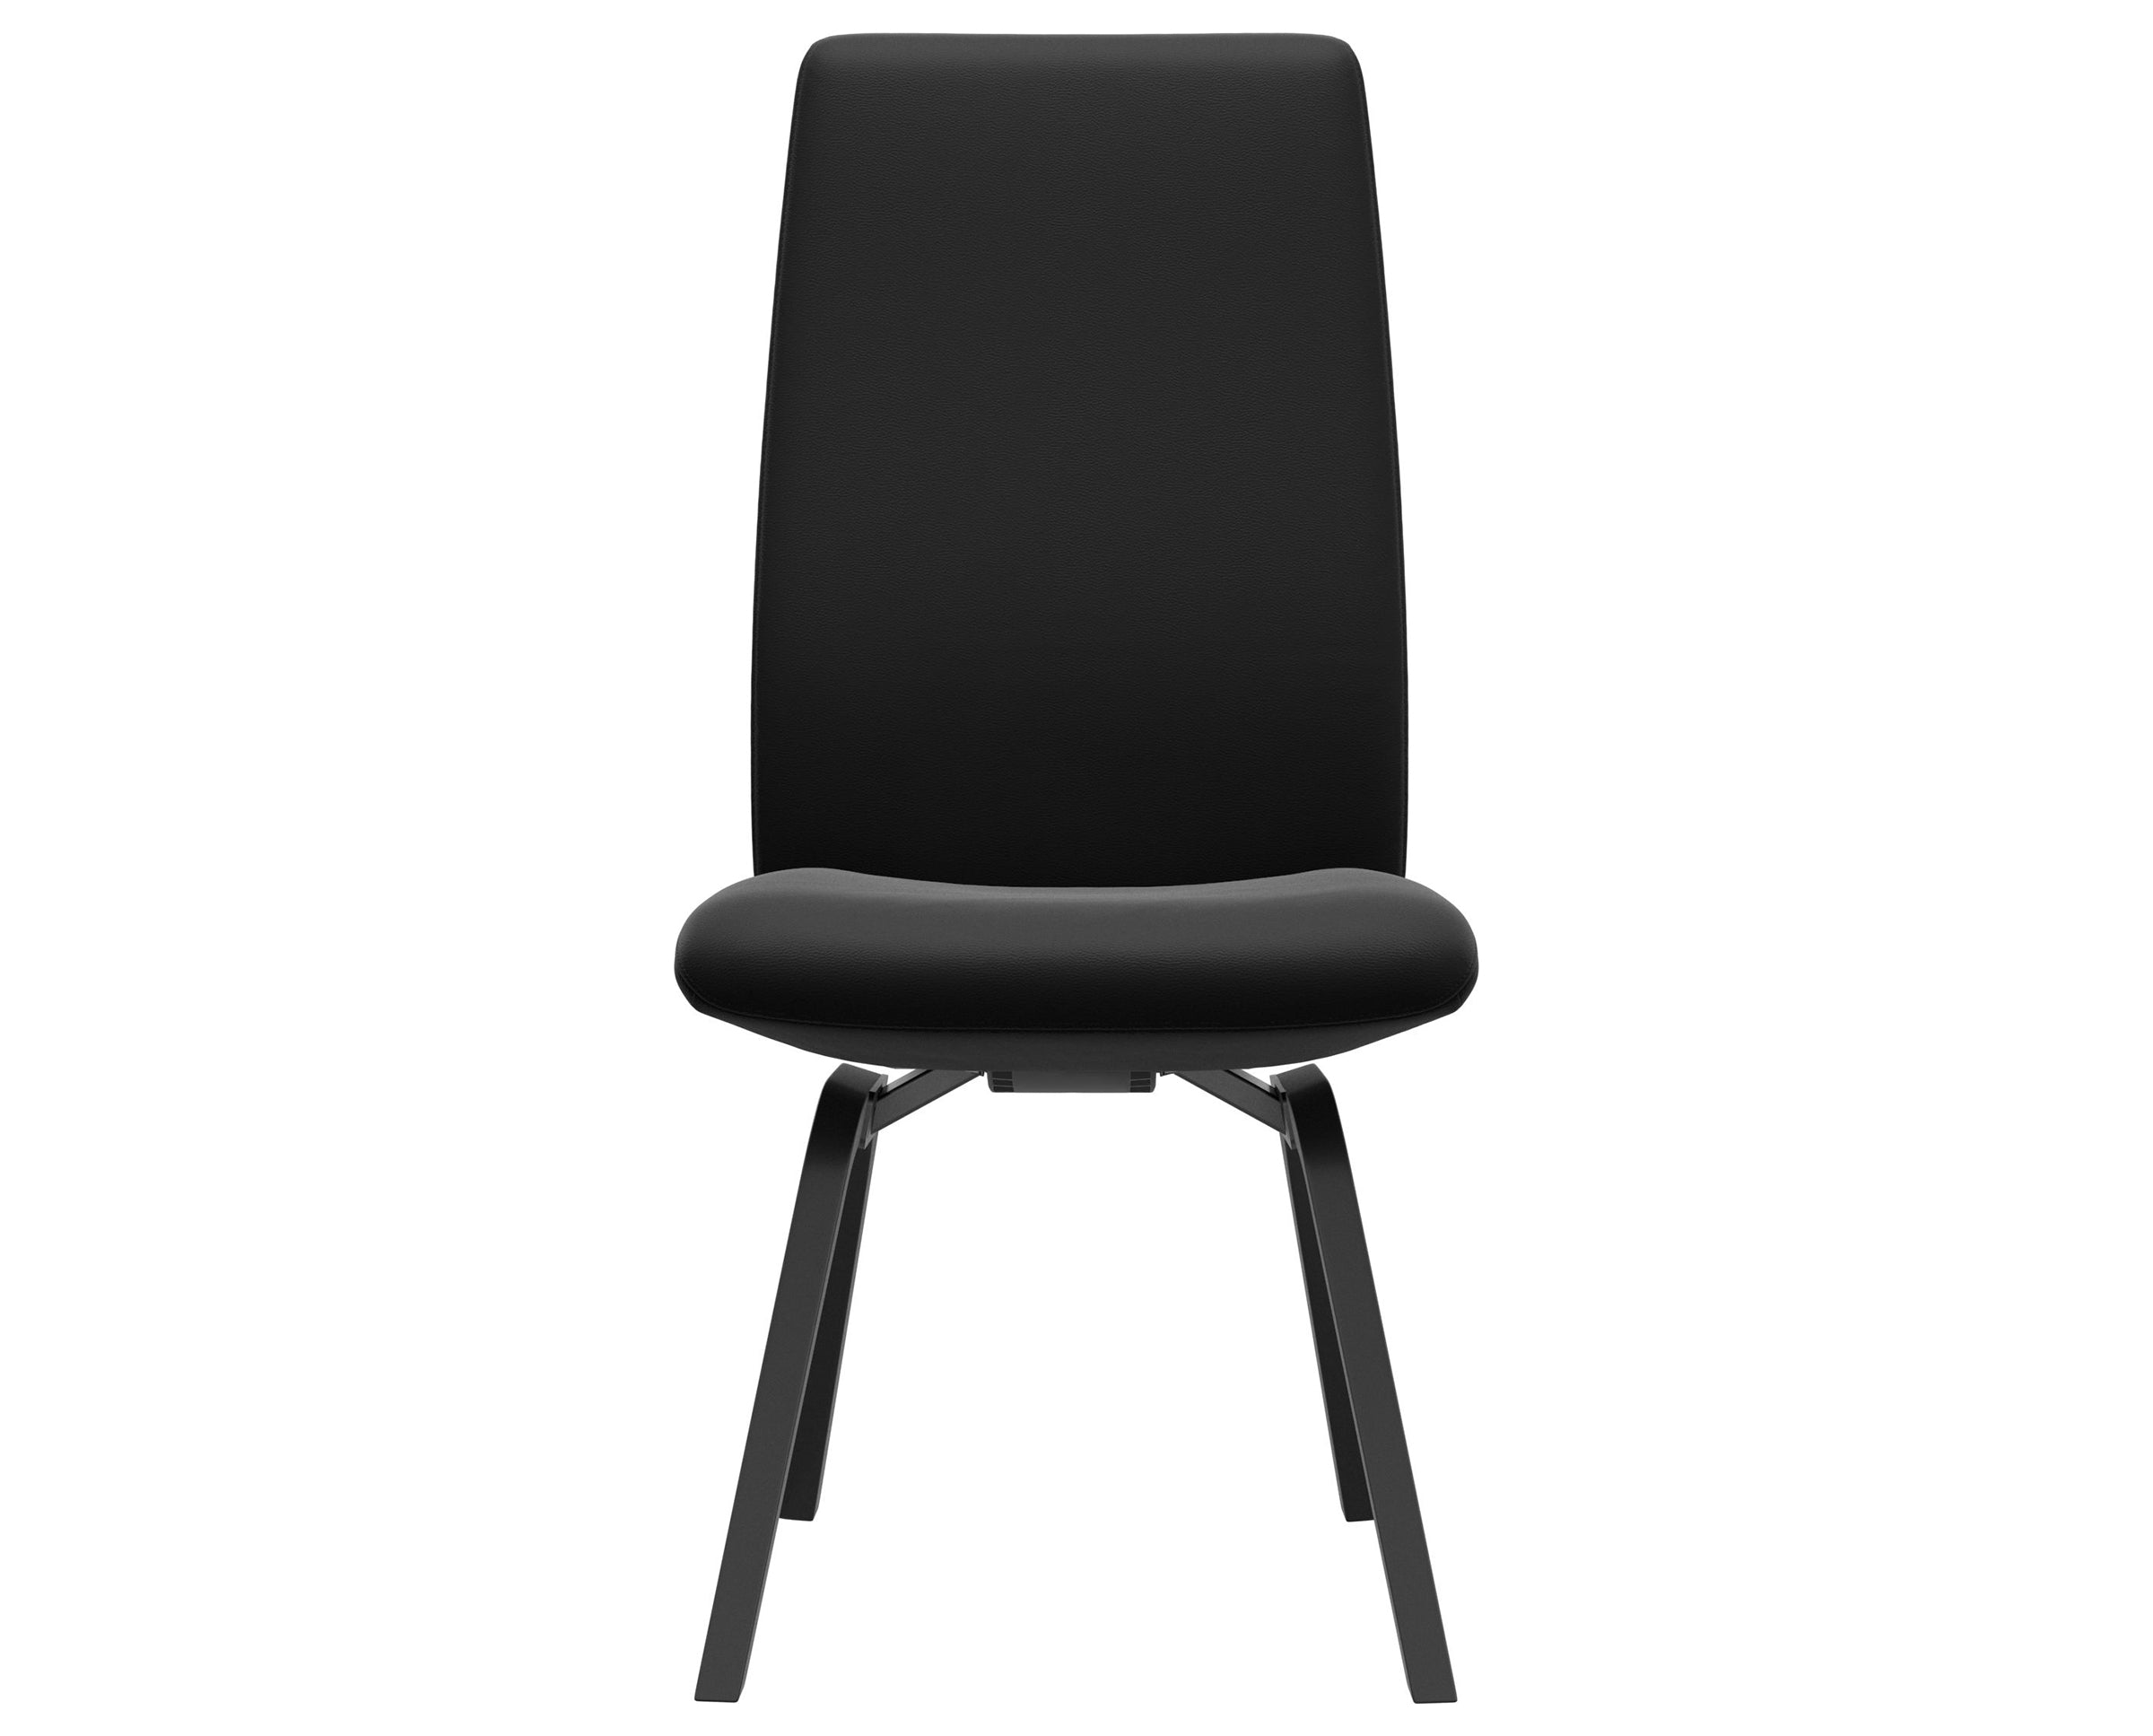 Paloma Leather Black and Black Base | Stressless Laurel High Back D200 Dining Chair | Valley Ridge Furniture